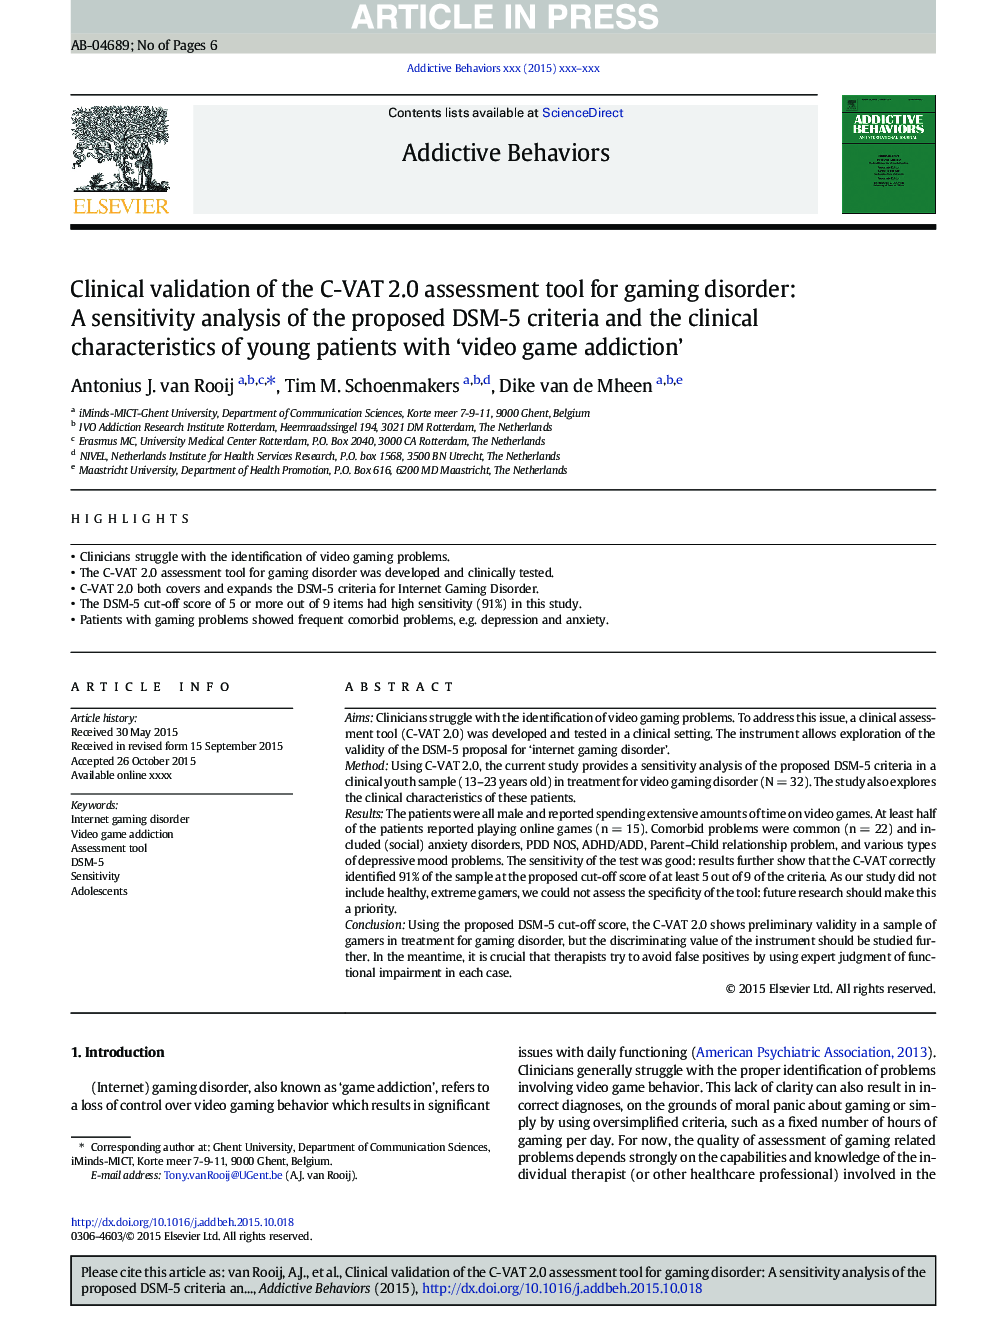 Clinical validation of the C-VAT 2.0 assessment tool for gaming disorder: A sensitivity analysis of the proposed DSM-5 criteria and the clinical characteristics of young patients with 'video game addiction'